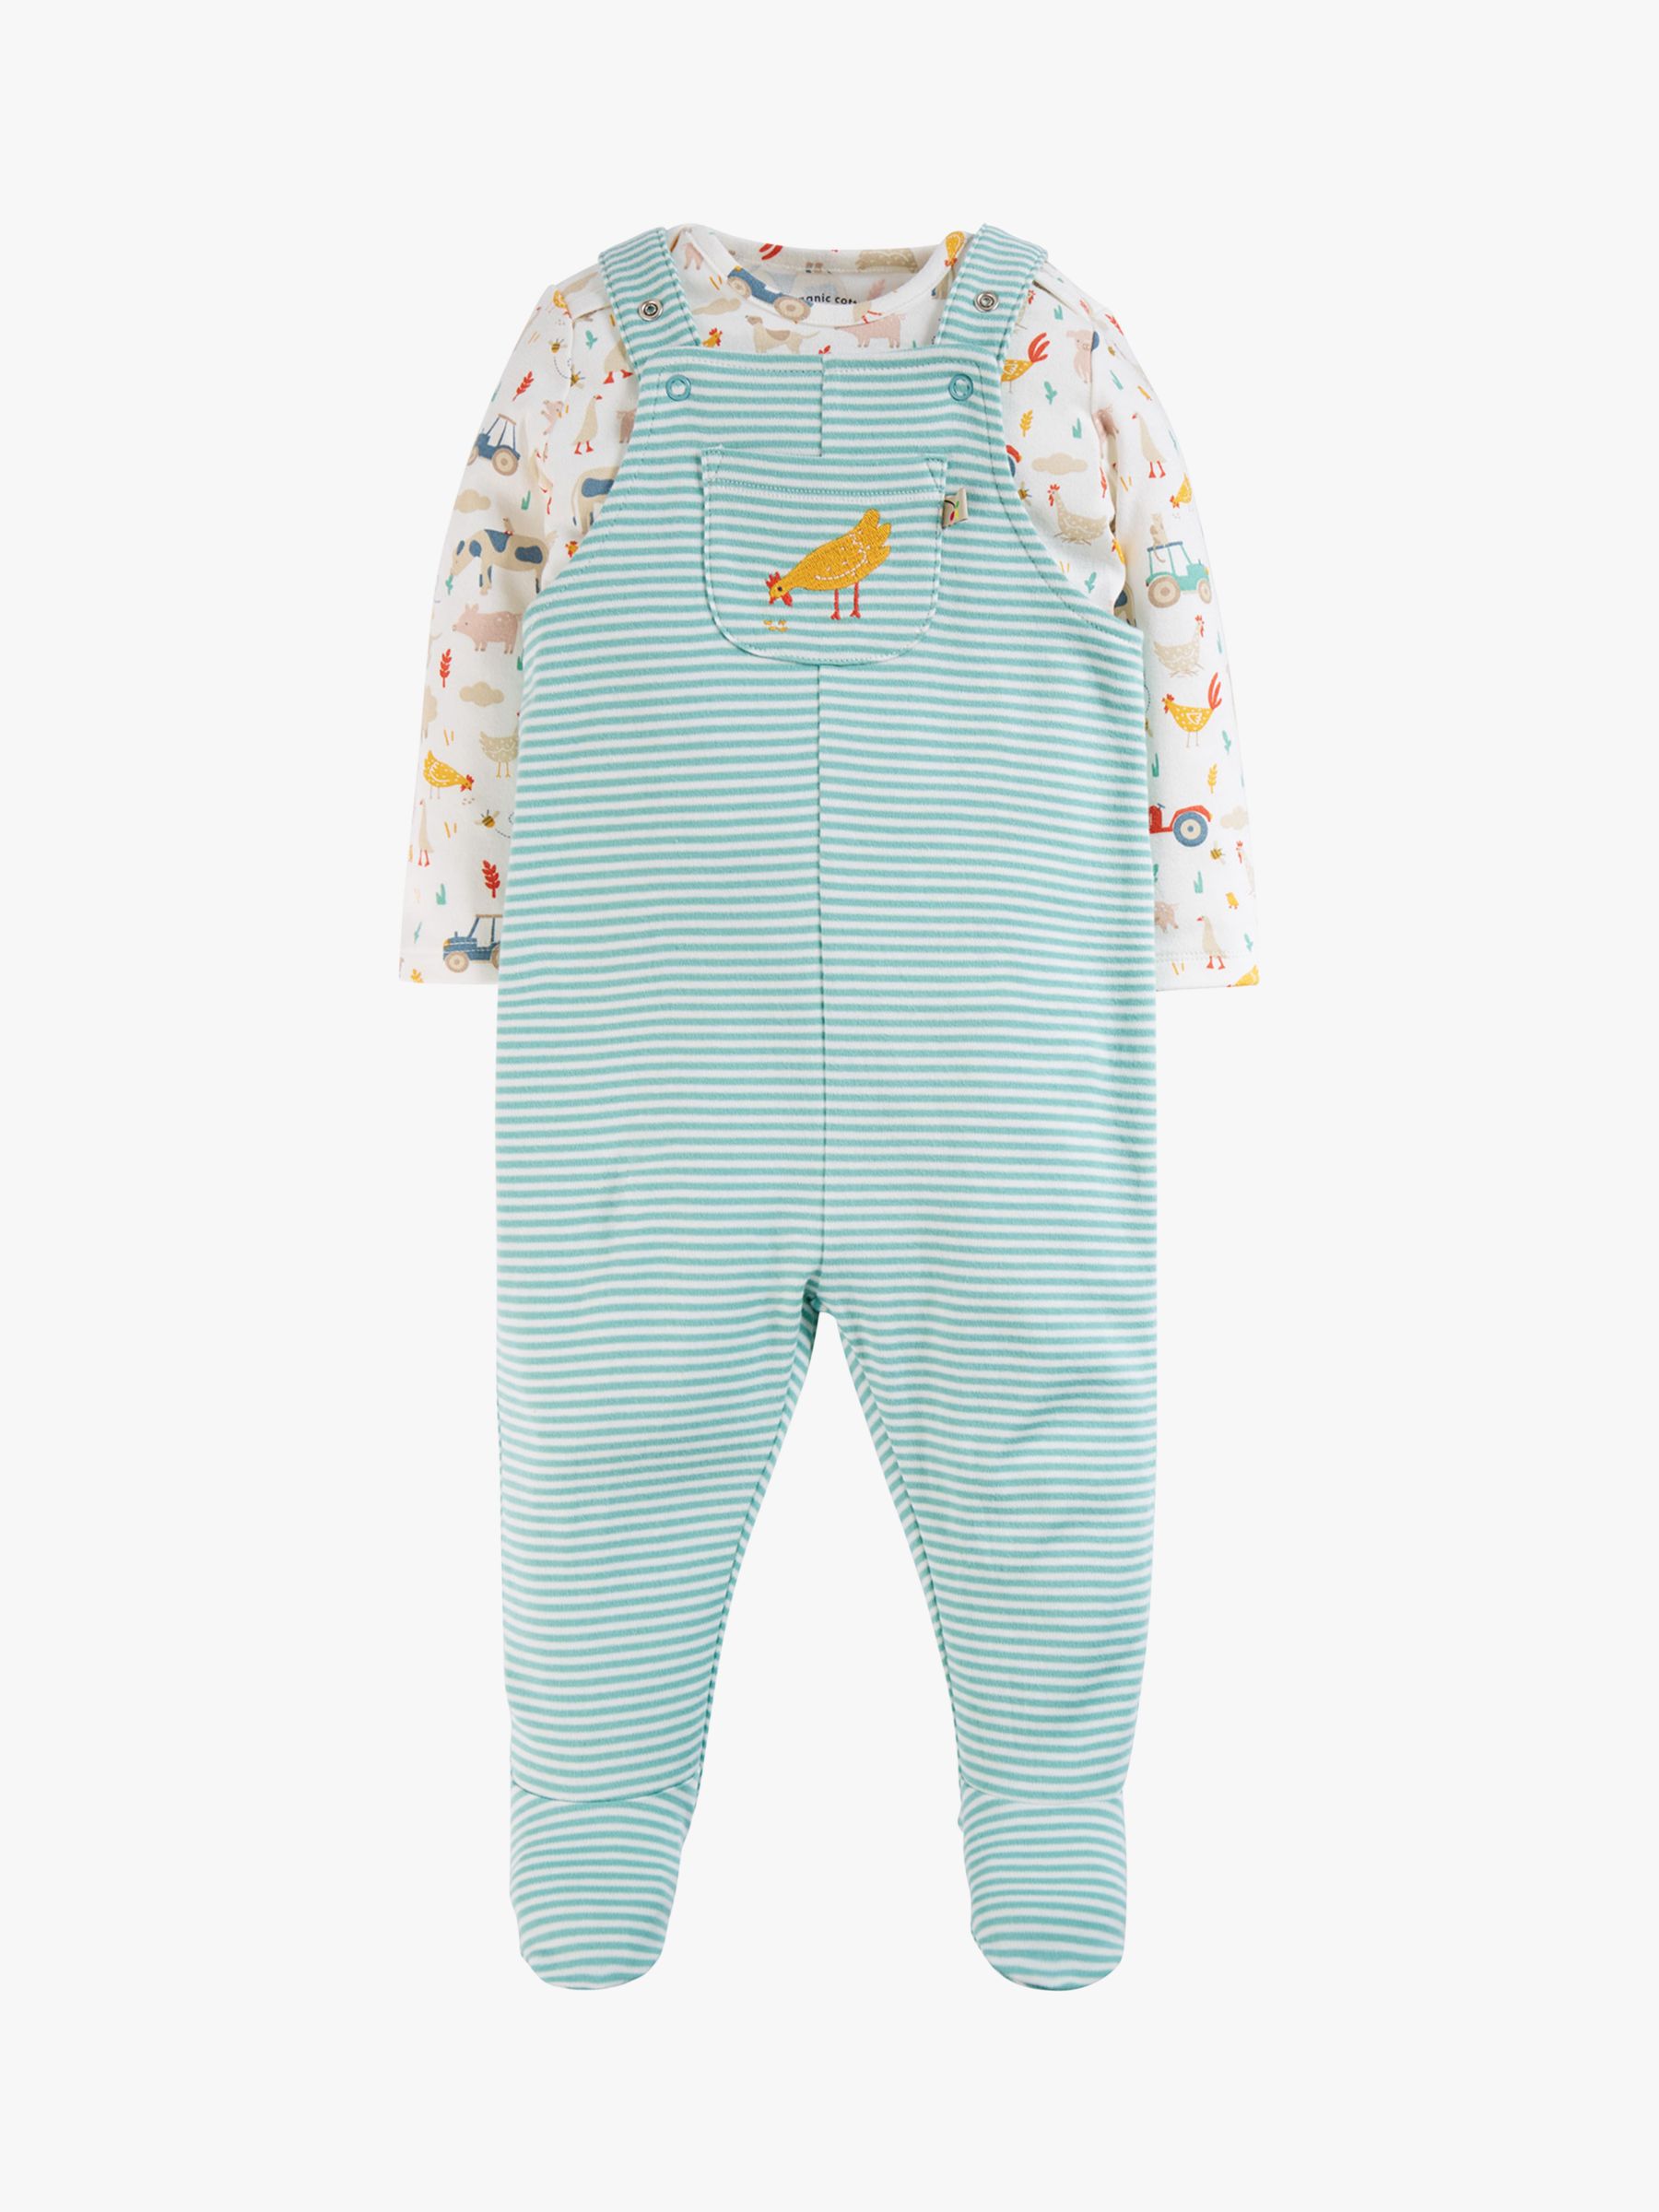 Frugi Baby Dillon Farmyard Friends Organic Cotton Dungaree Outfit